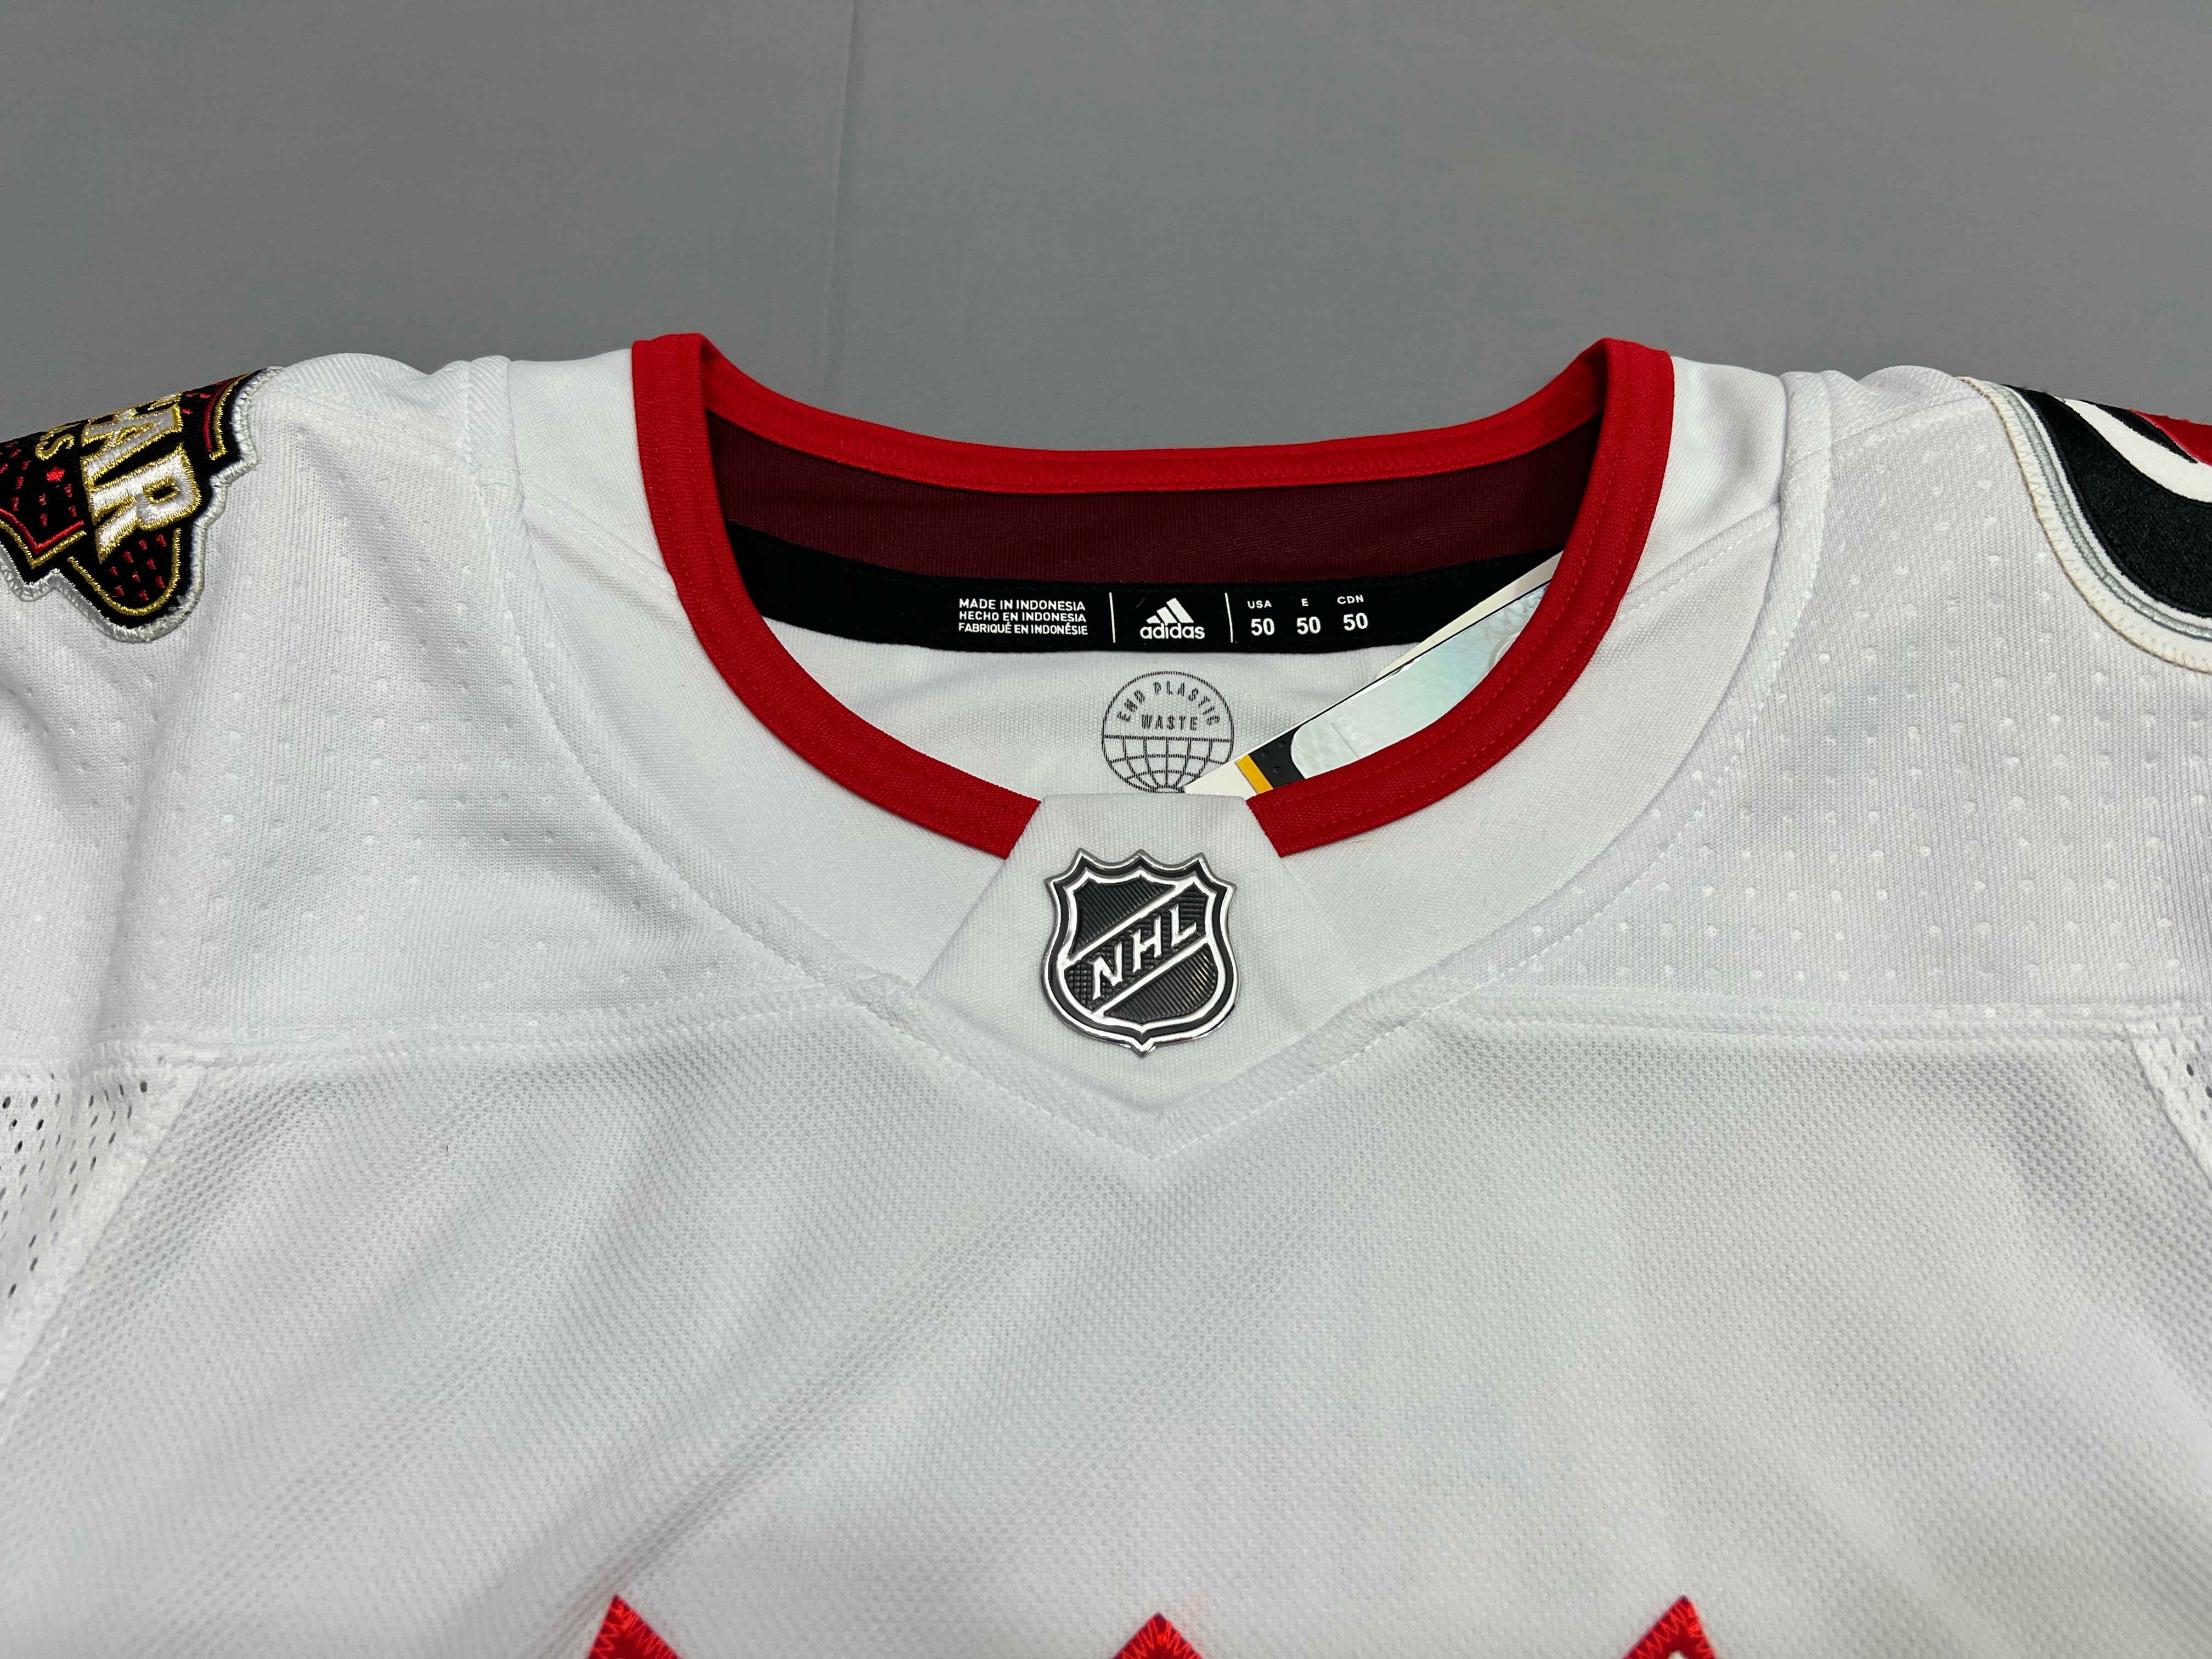 2019 NHL All-Star Jerseys, Sebastian Aho will be looking 🔥 at the  #NHLAllStar Game Check out the eco-friendly threads 🌊, By Carolina  Hurricanes